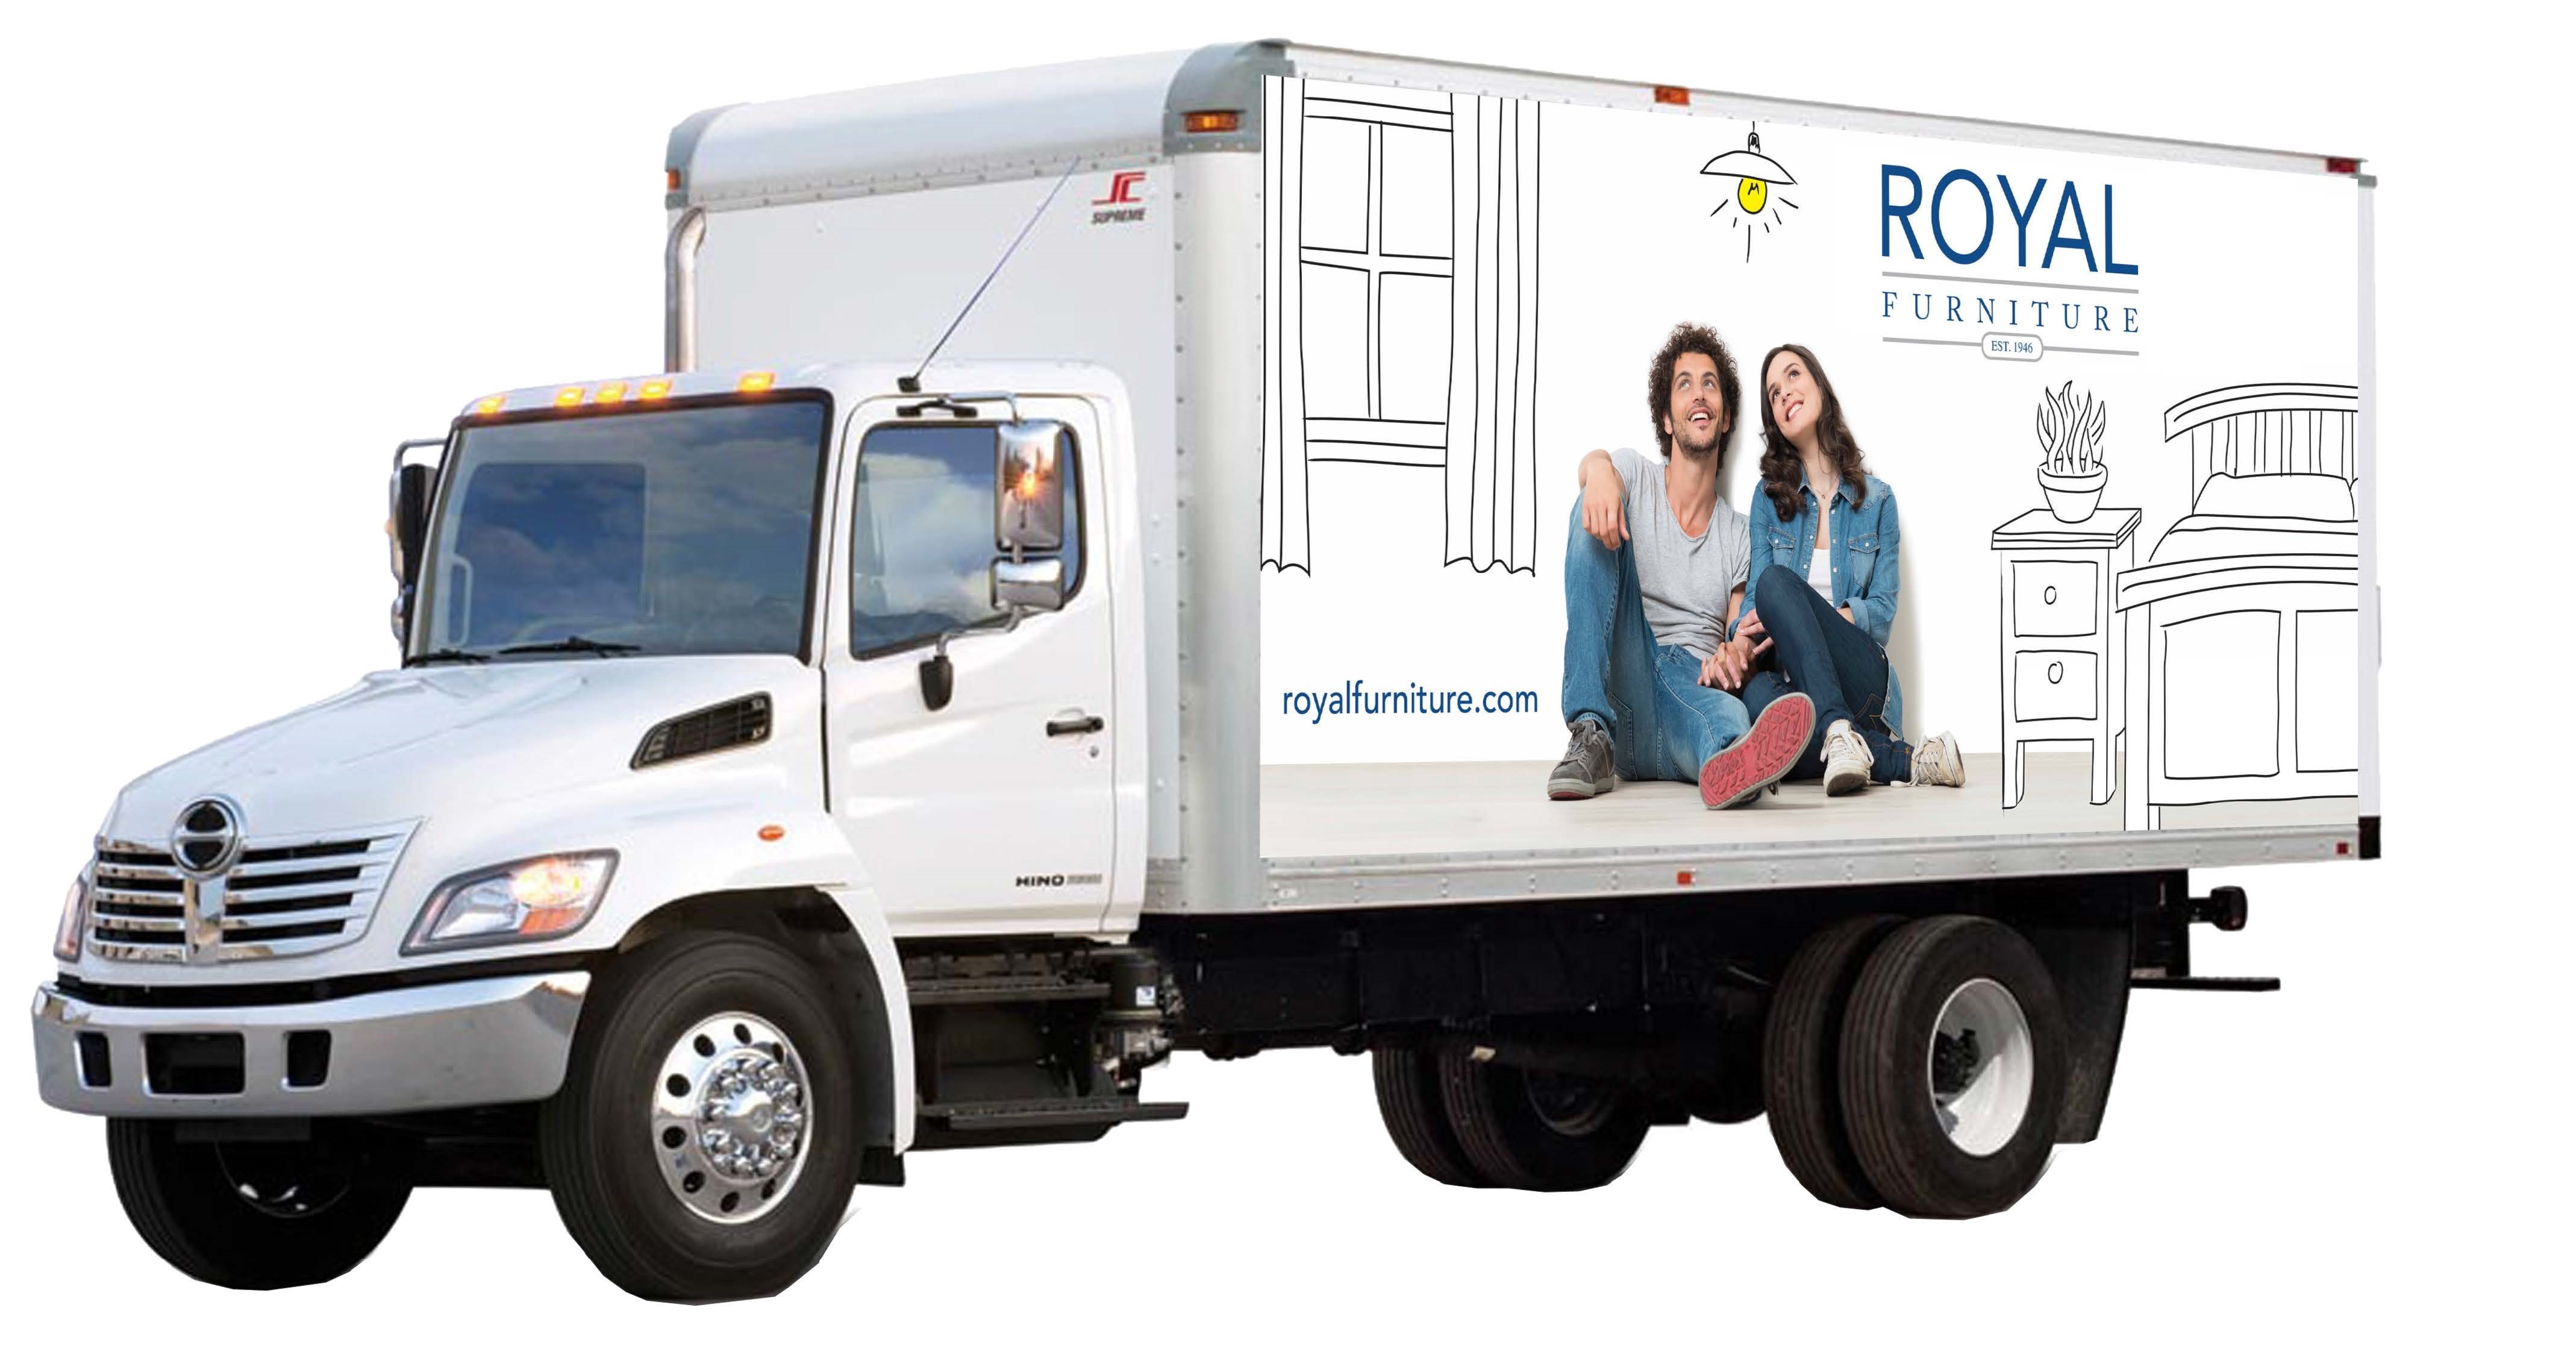 Royal Furniture delivery truck